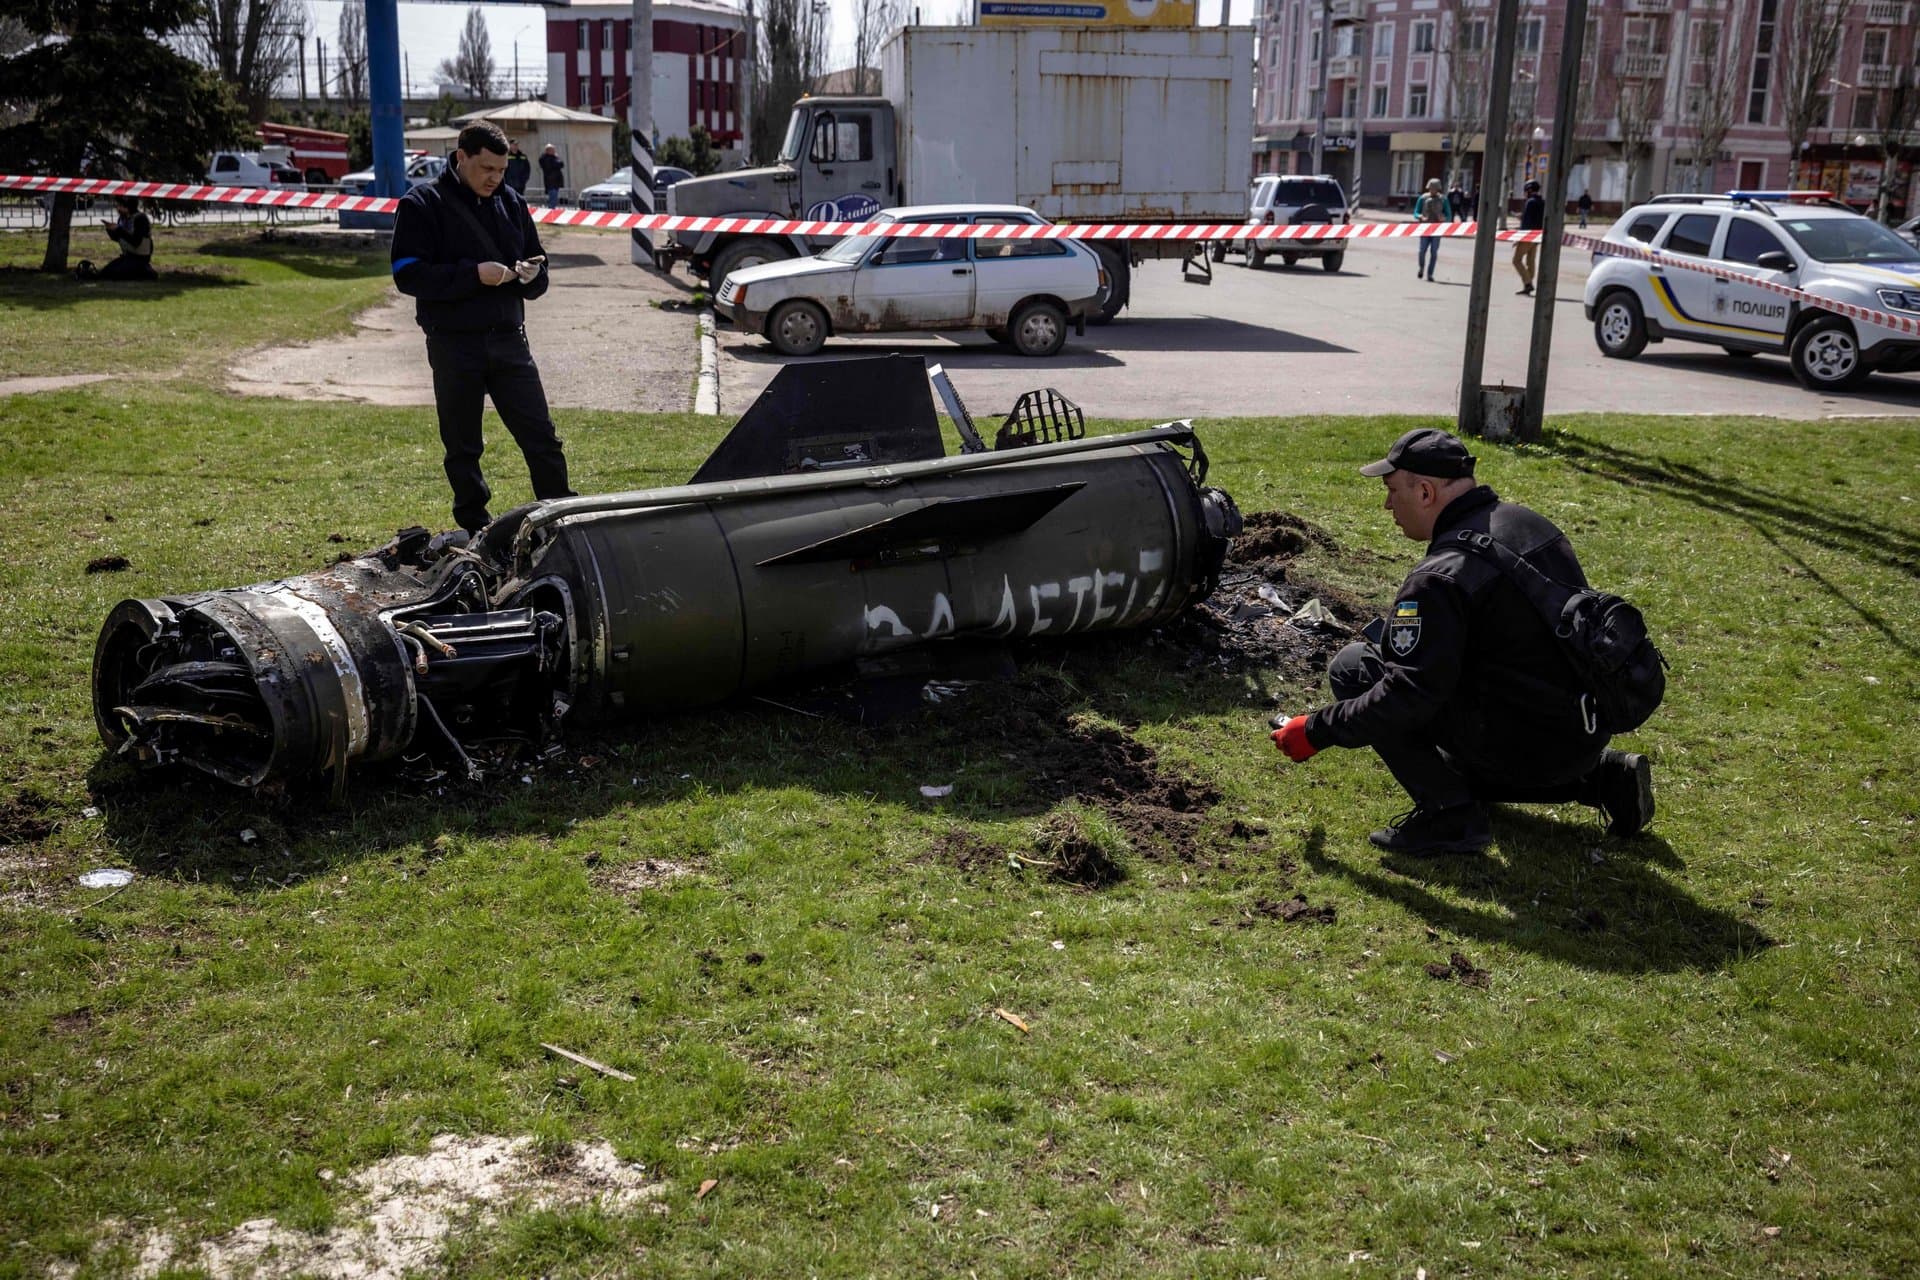 Ukrainian police inspect the remains of a large rocket next to the main building of a train station in Kramatorsk